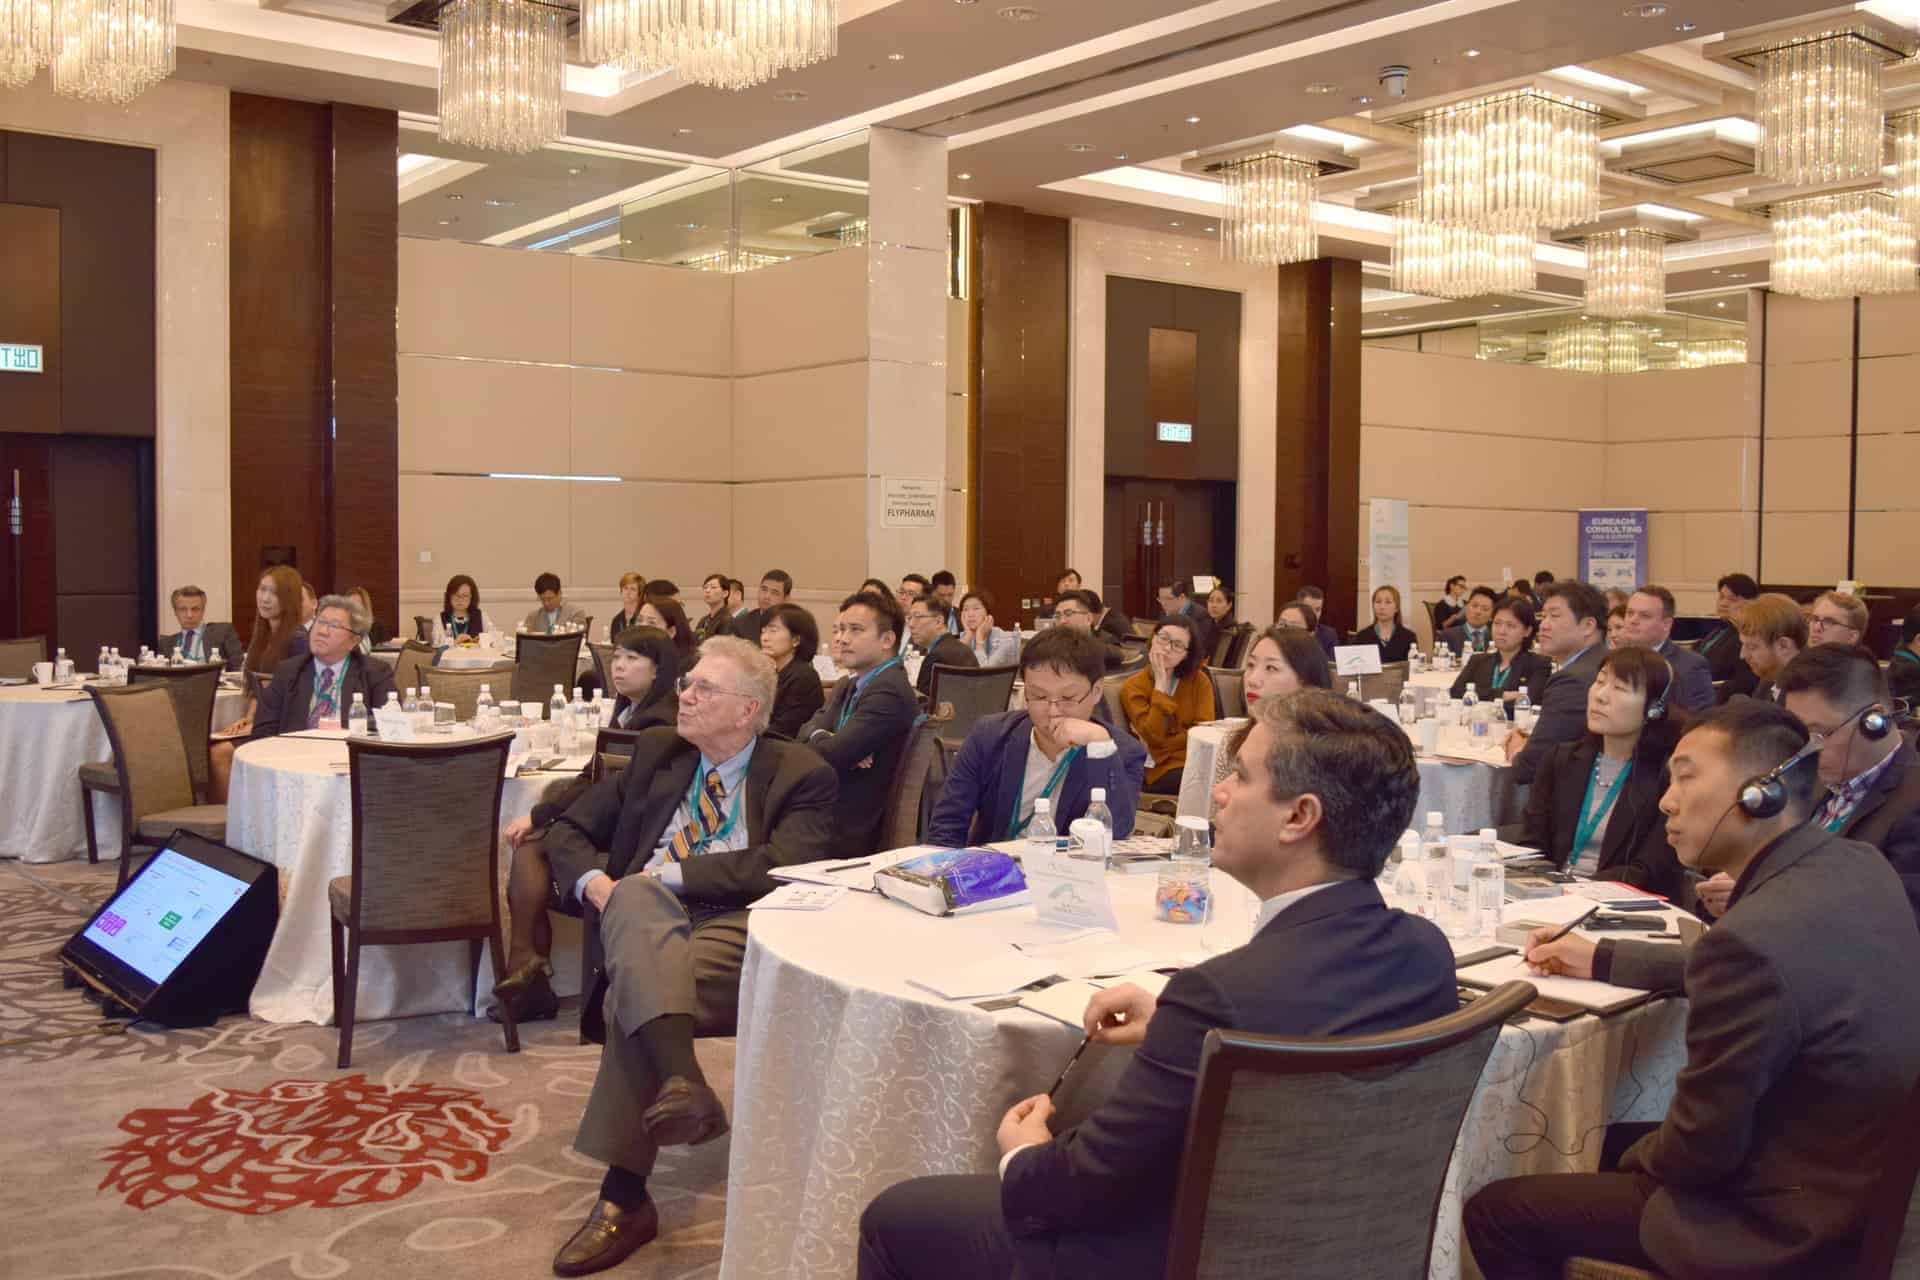 Four reasons to attend FlyPharma Asia